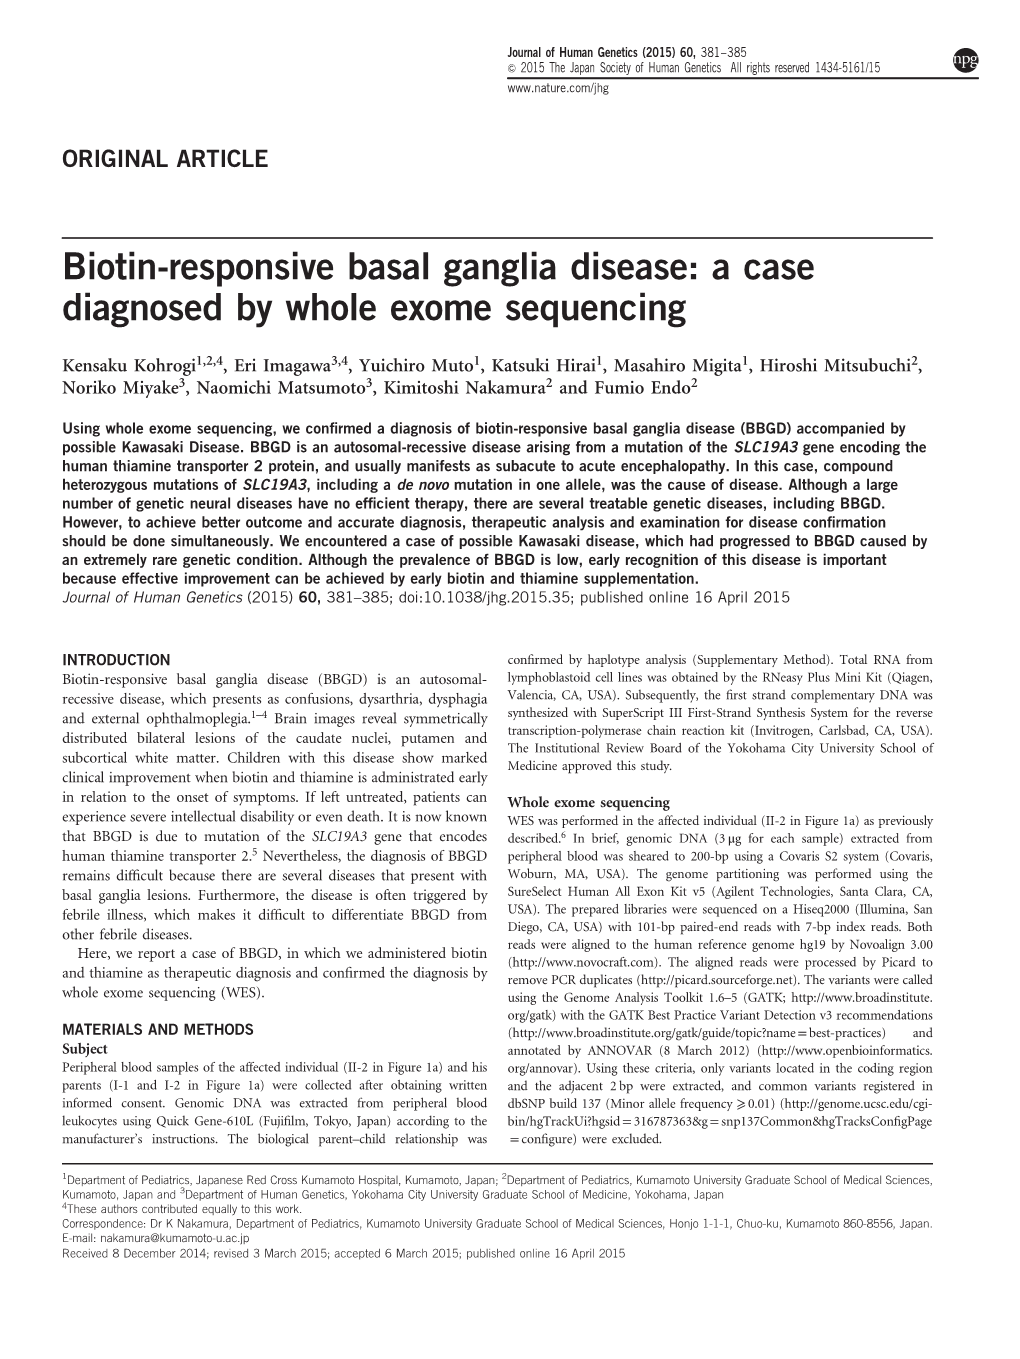 Biotin-Responsive Basal Ganglia Disease: a Case Diagnosed by Whole Exome Sequencing